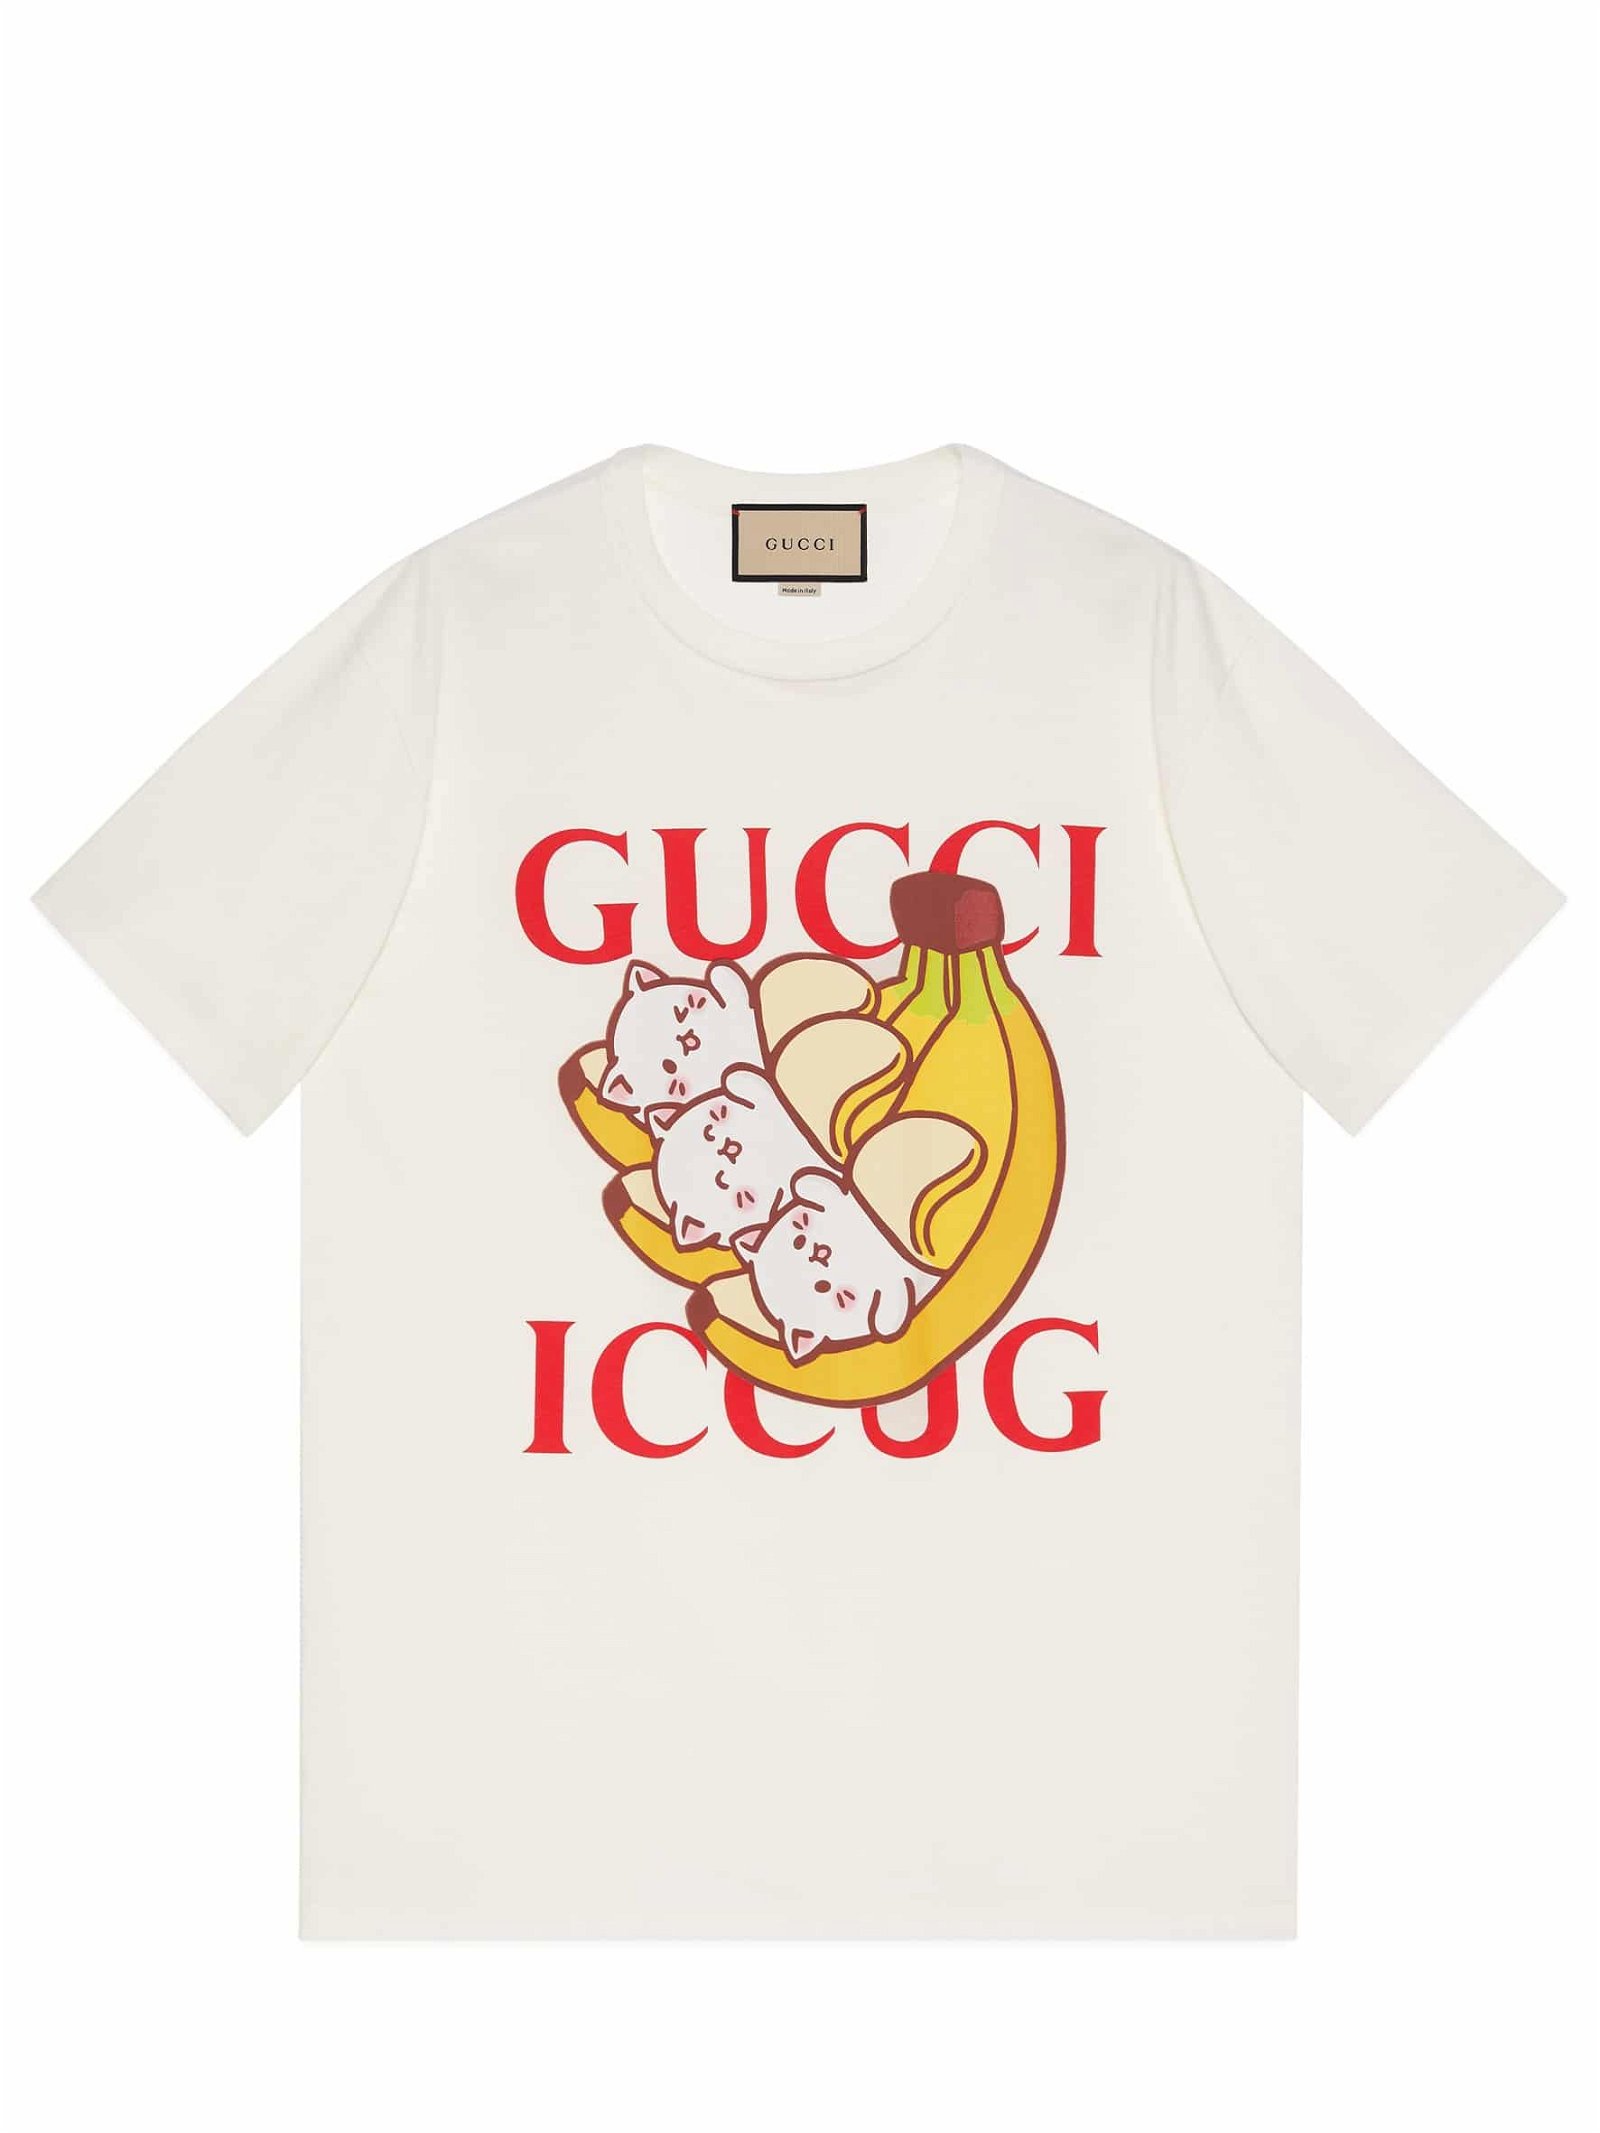 Gucci and Crunchyroll Collaborate on Special Bananya Collection